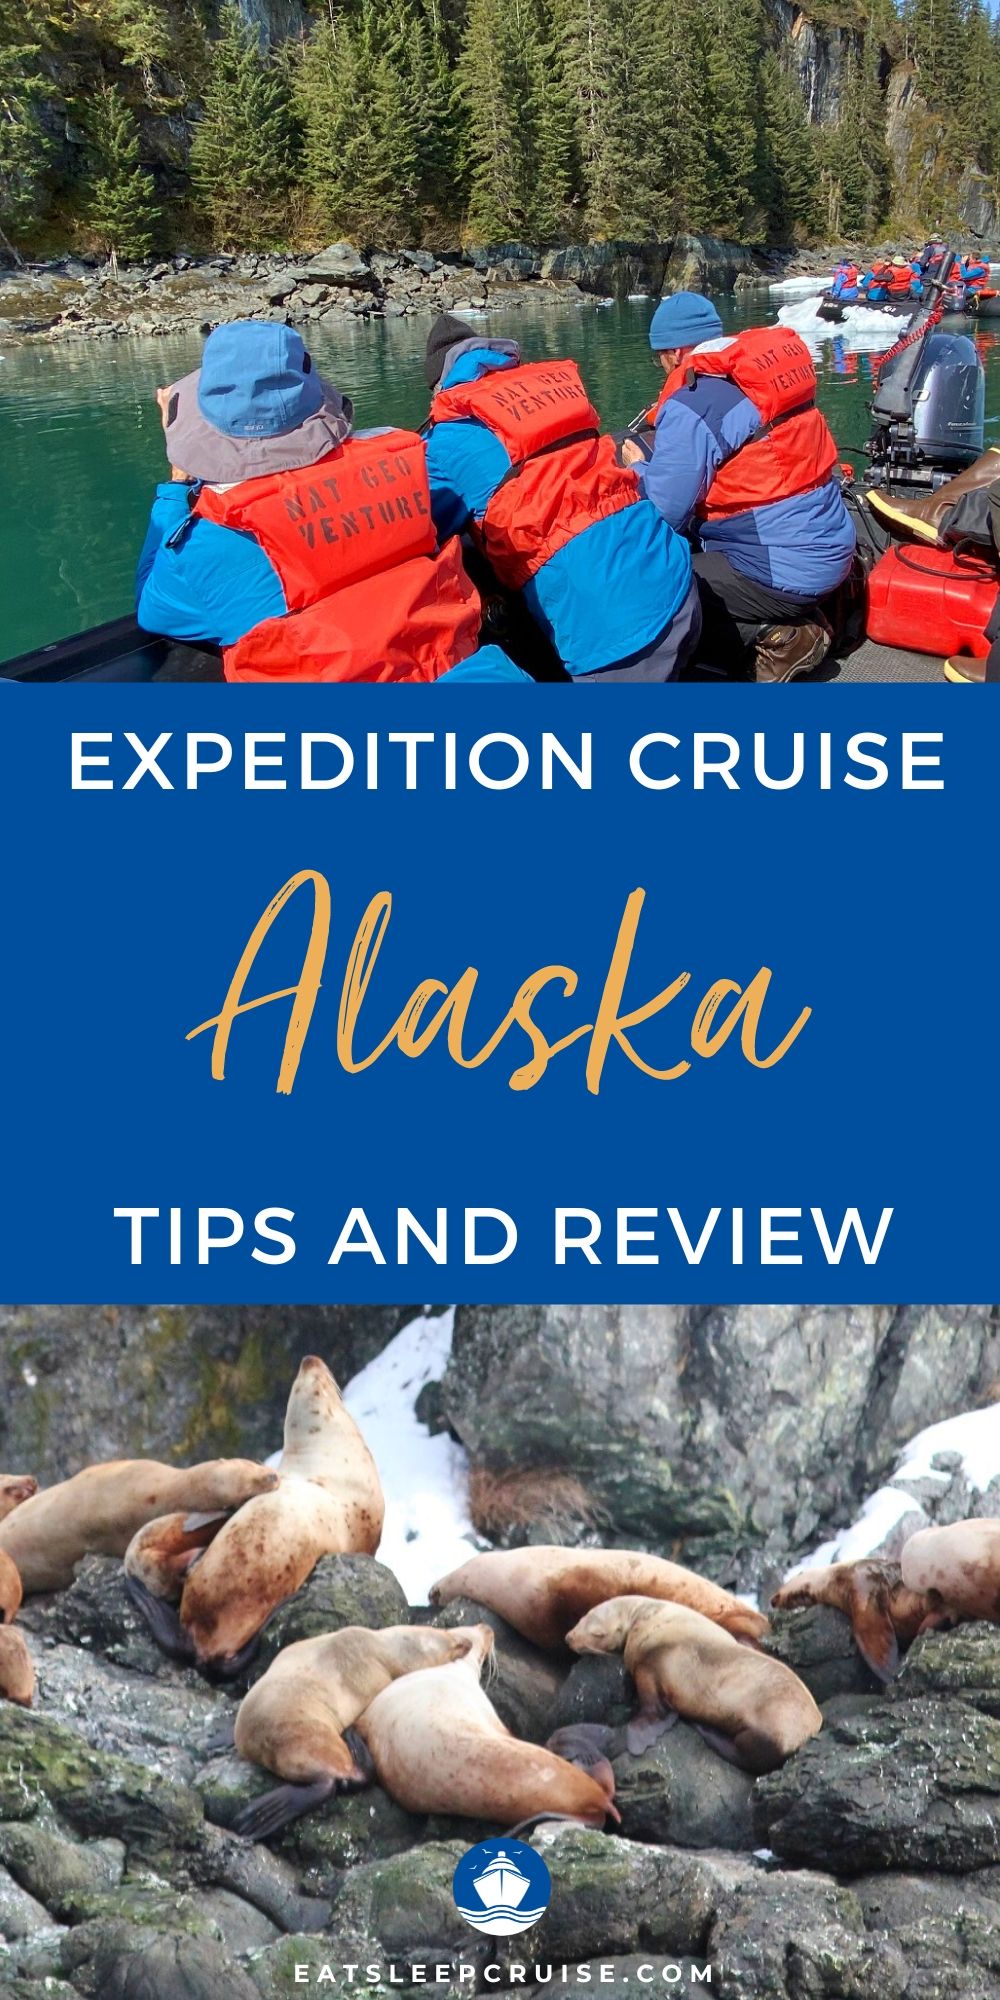 Experiencing the Last Frontier on an Alaska Expedition Cruise